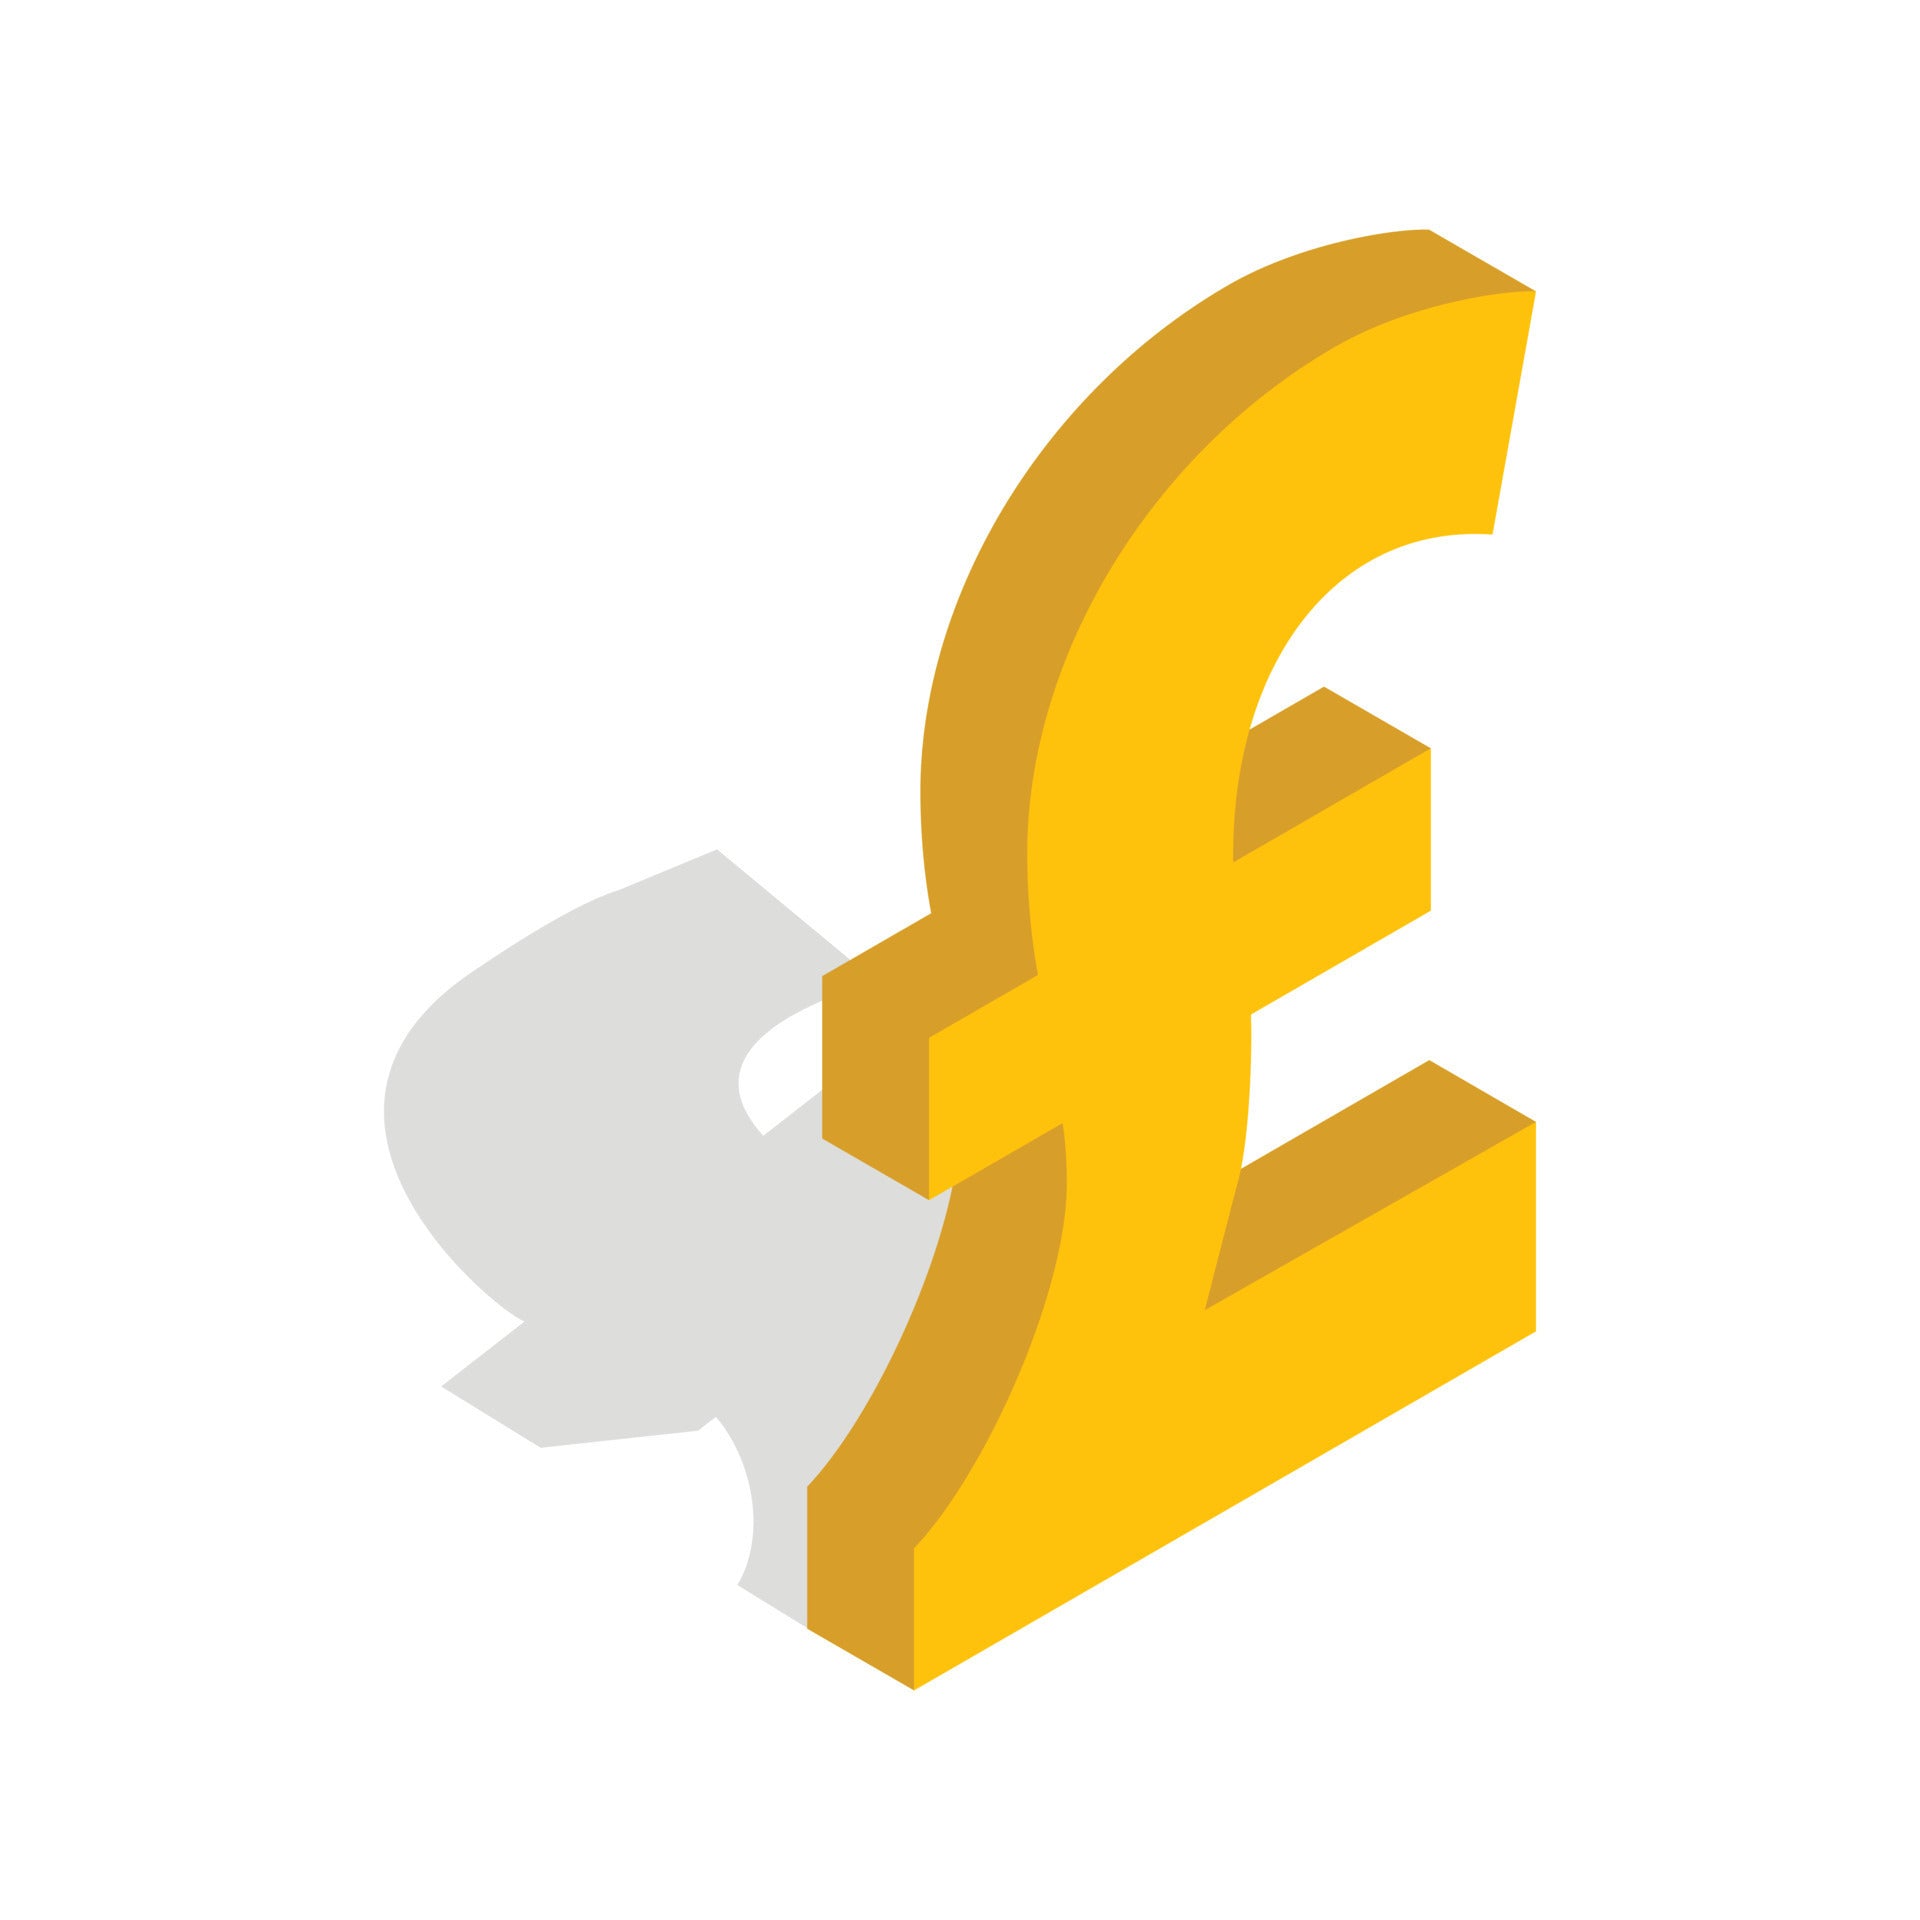 central junk image of pound sign for cost guide blogs